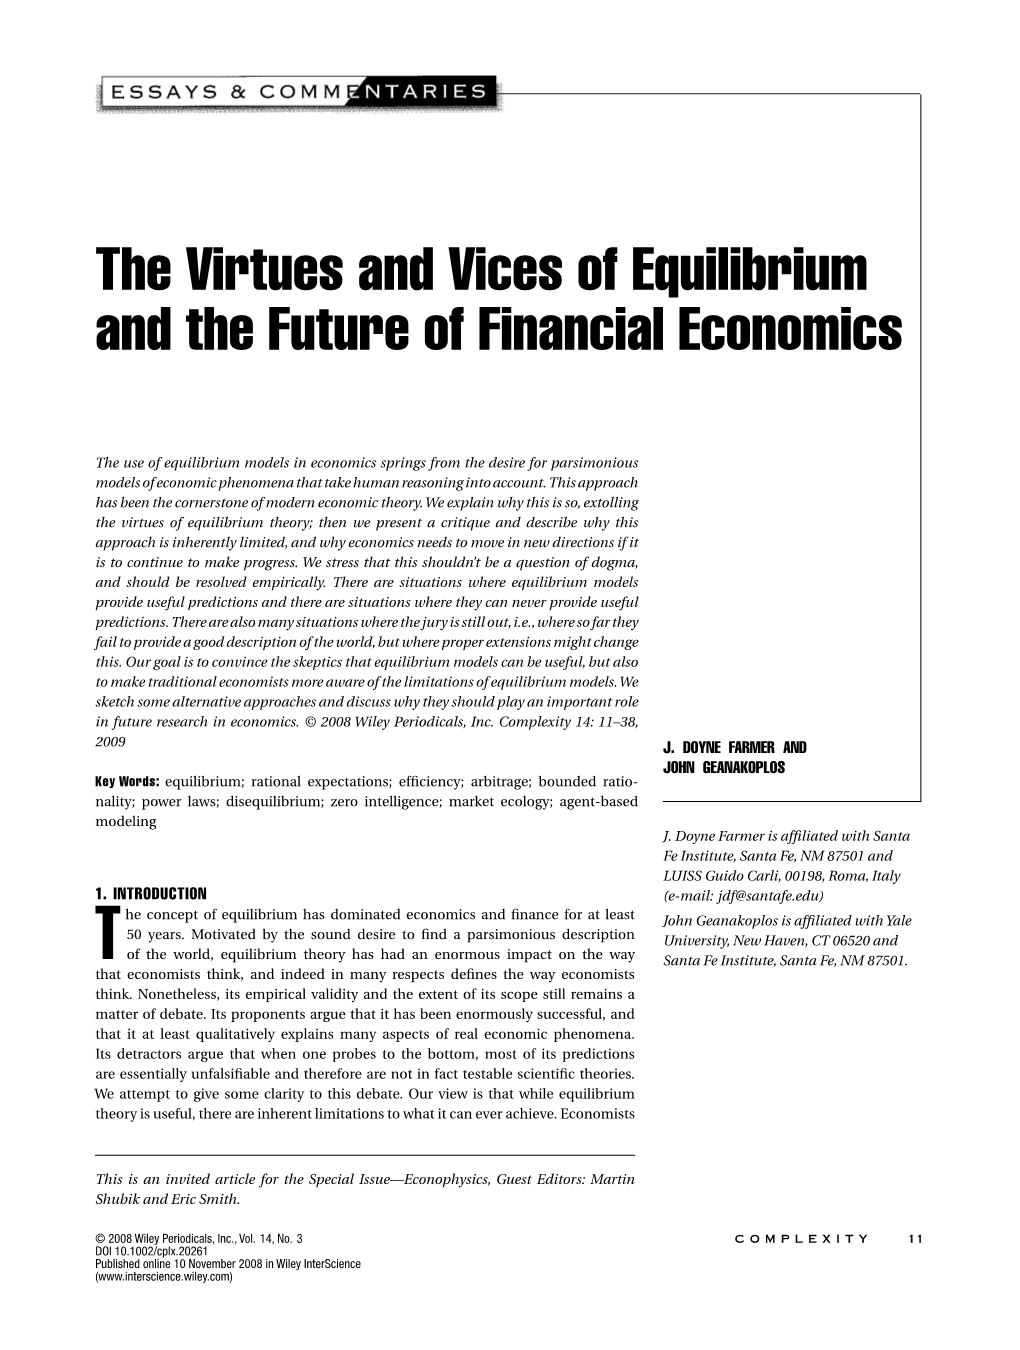 The Virtues and Vices of Equilibrium and the Future of Financial Economics